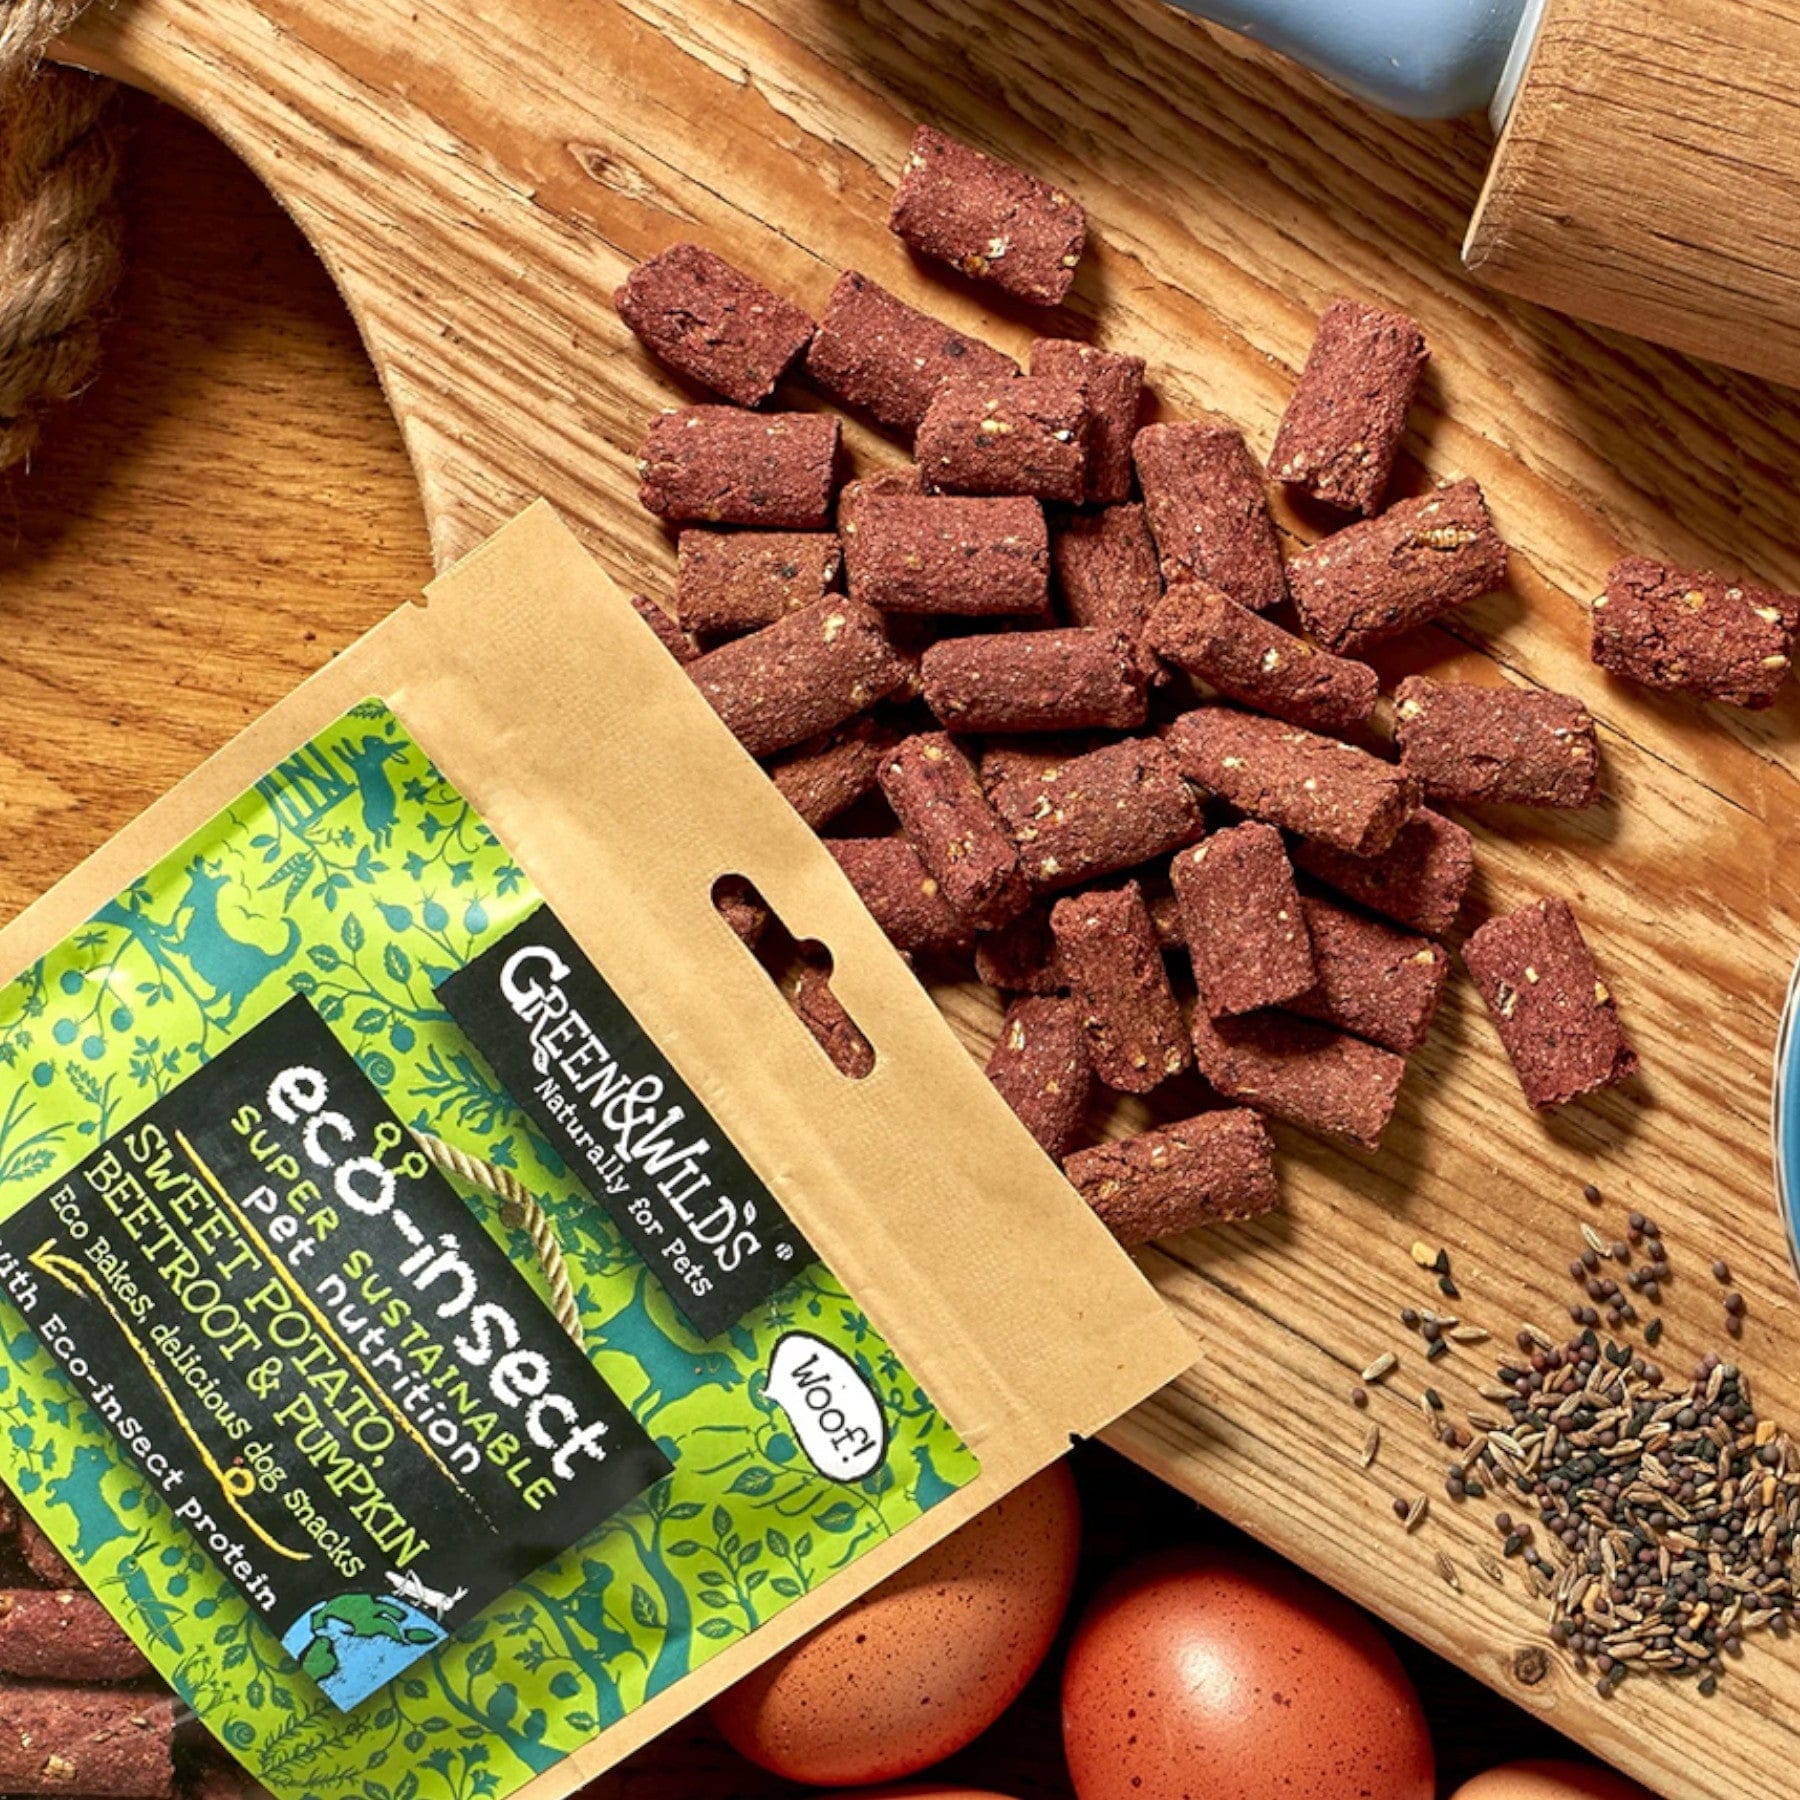 Eco-friendly insect protein dog treats spilling from a sustainable packaging on wooden surface next to eggs and a scoop of seeds.